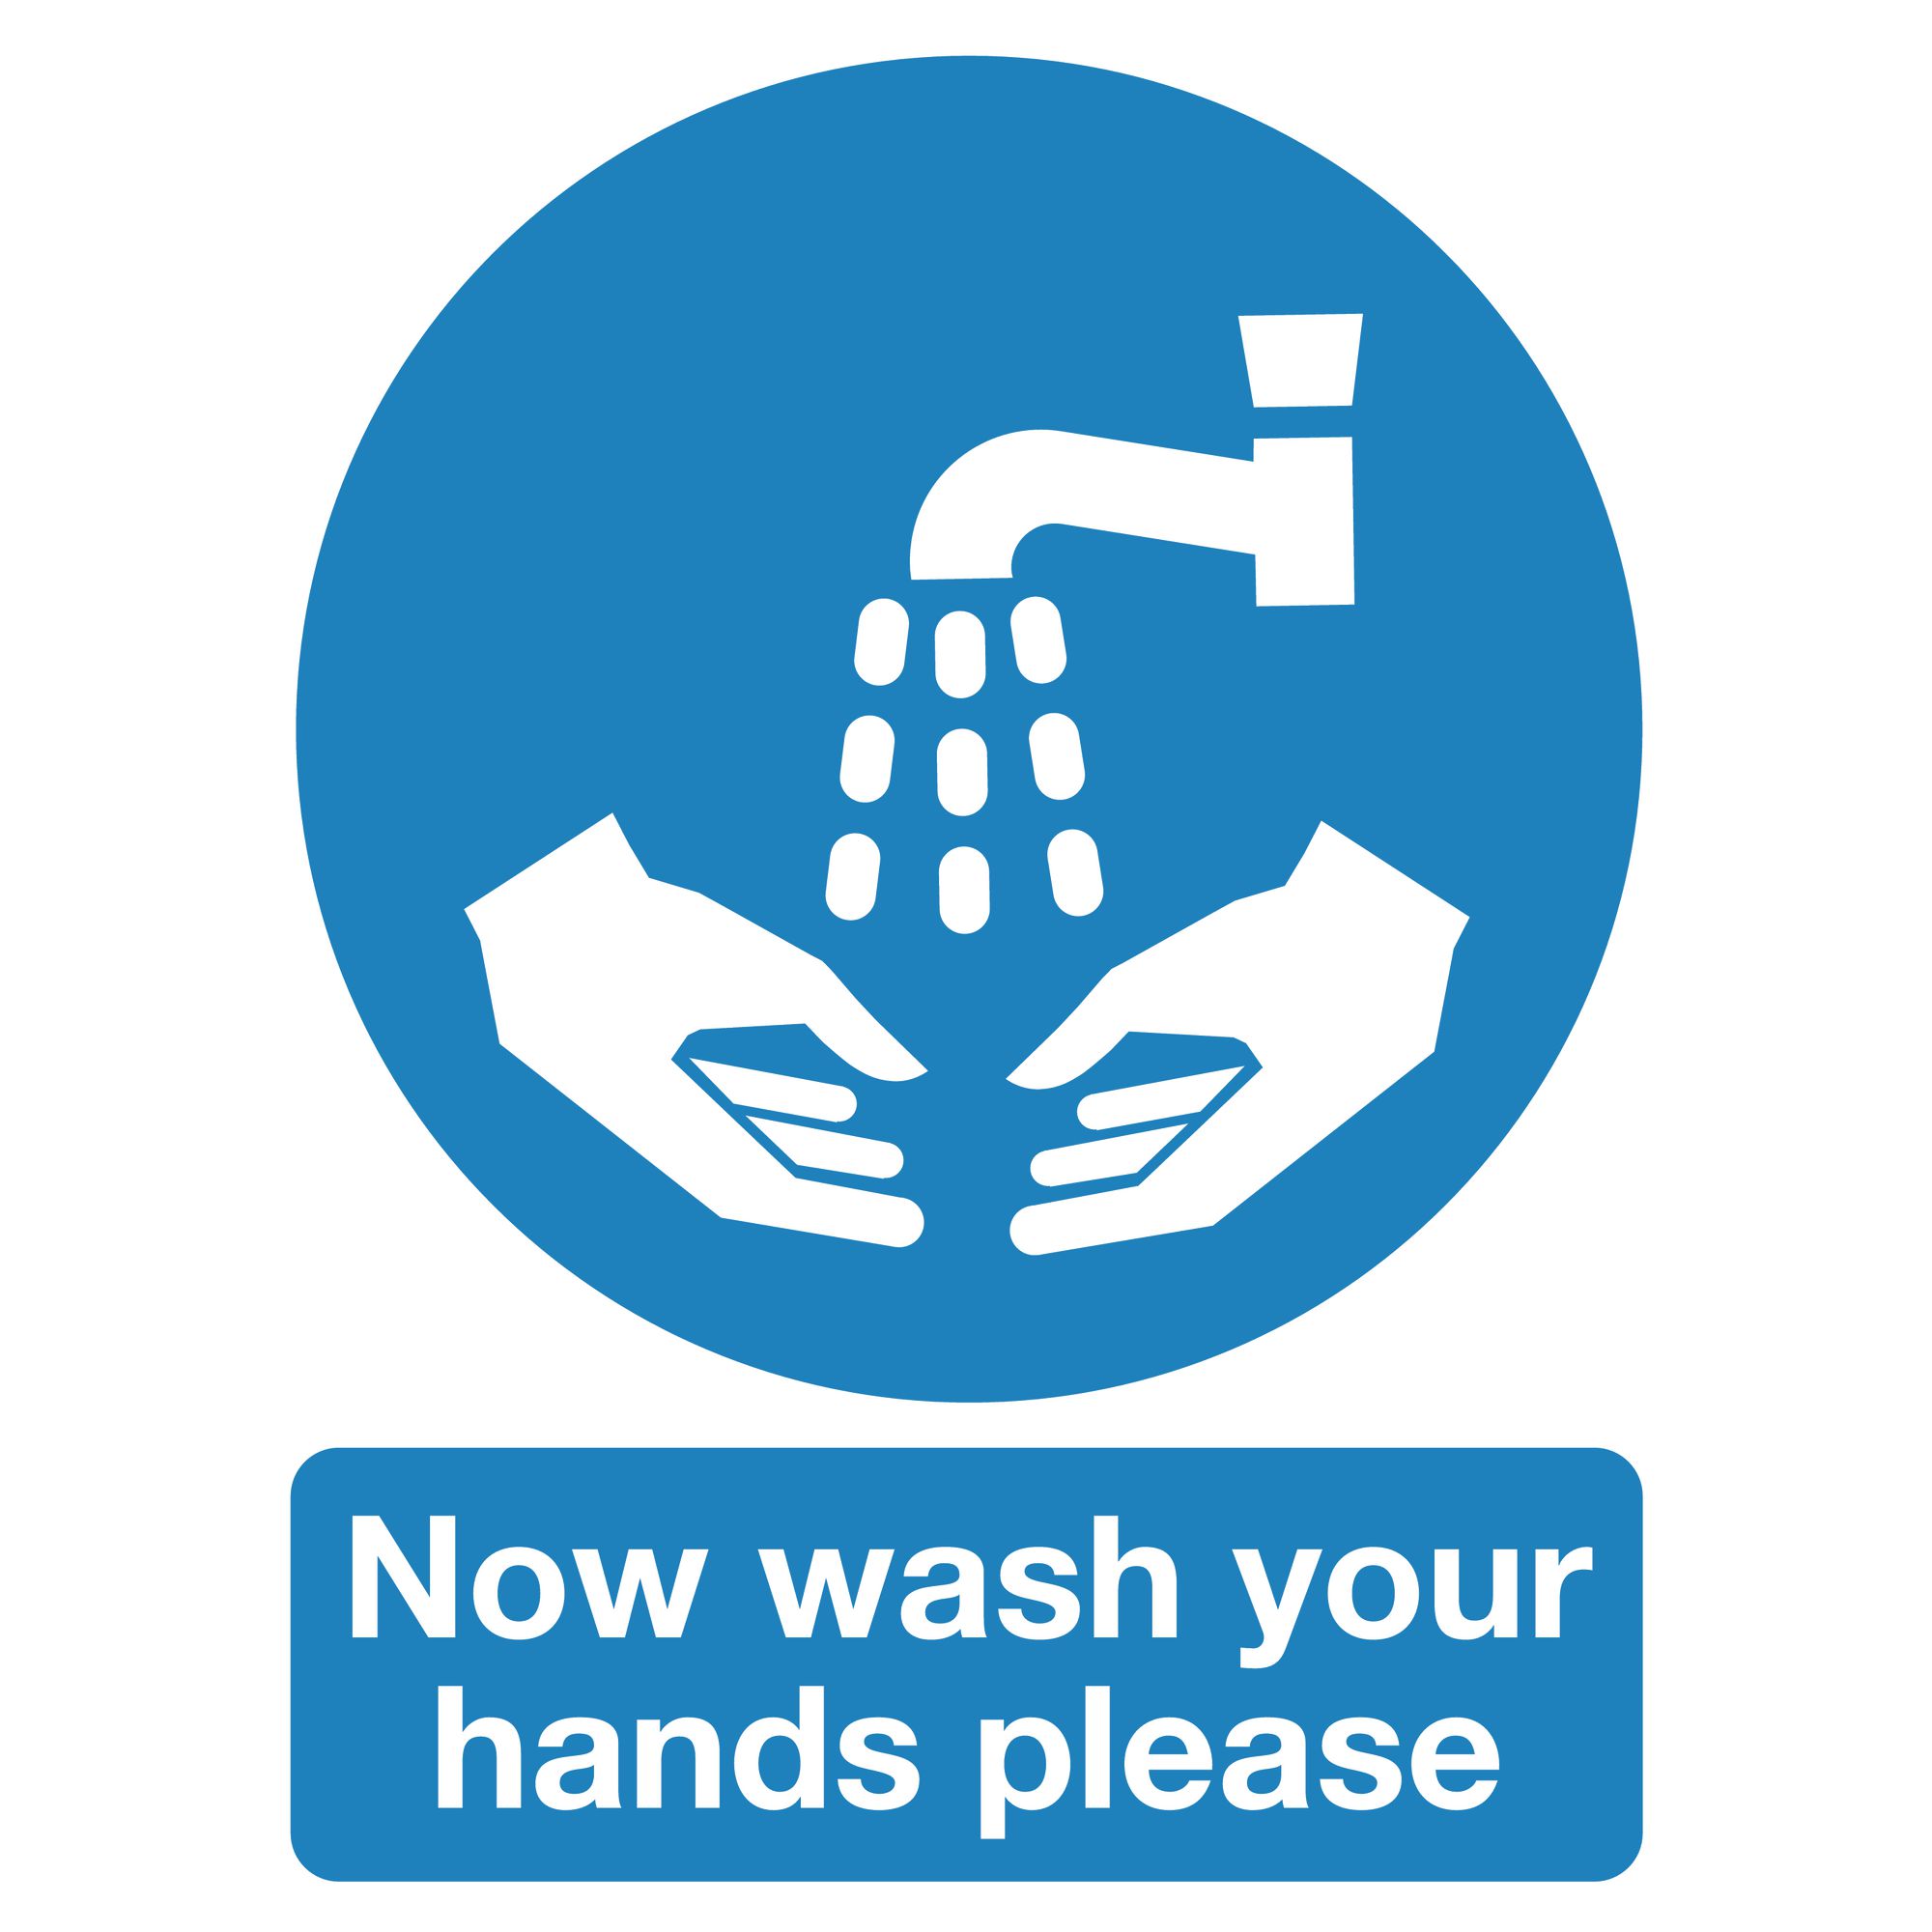 wash-hands-safety-signs-210-x-148mm-s-a-g48173554-gls-educational-supplies